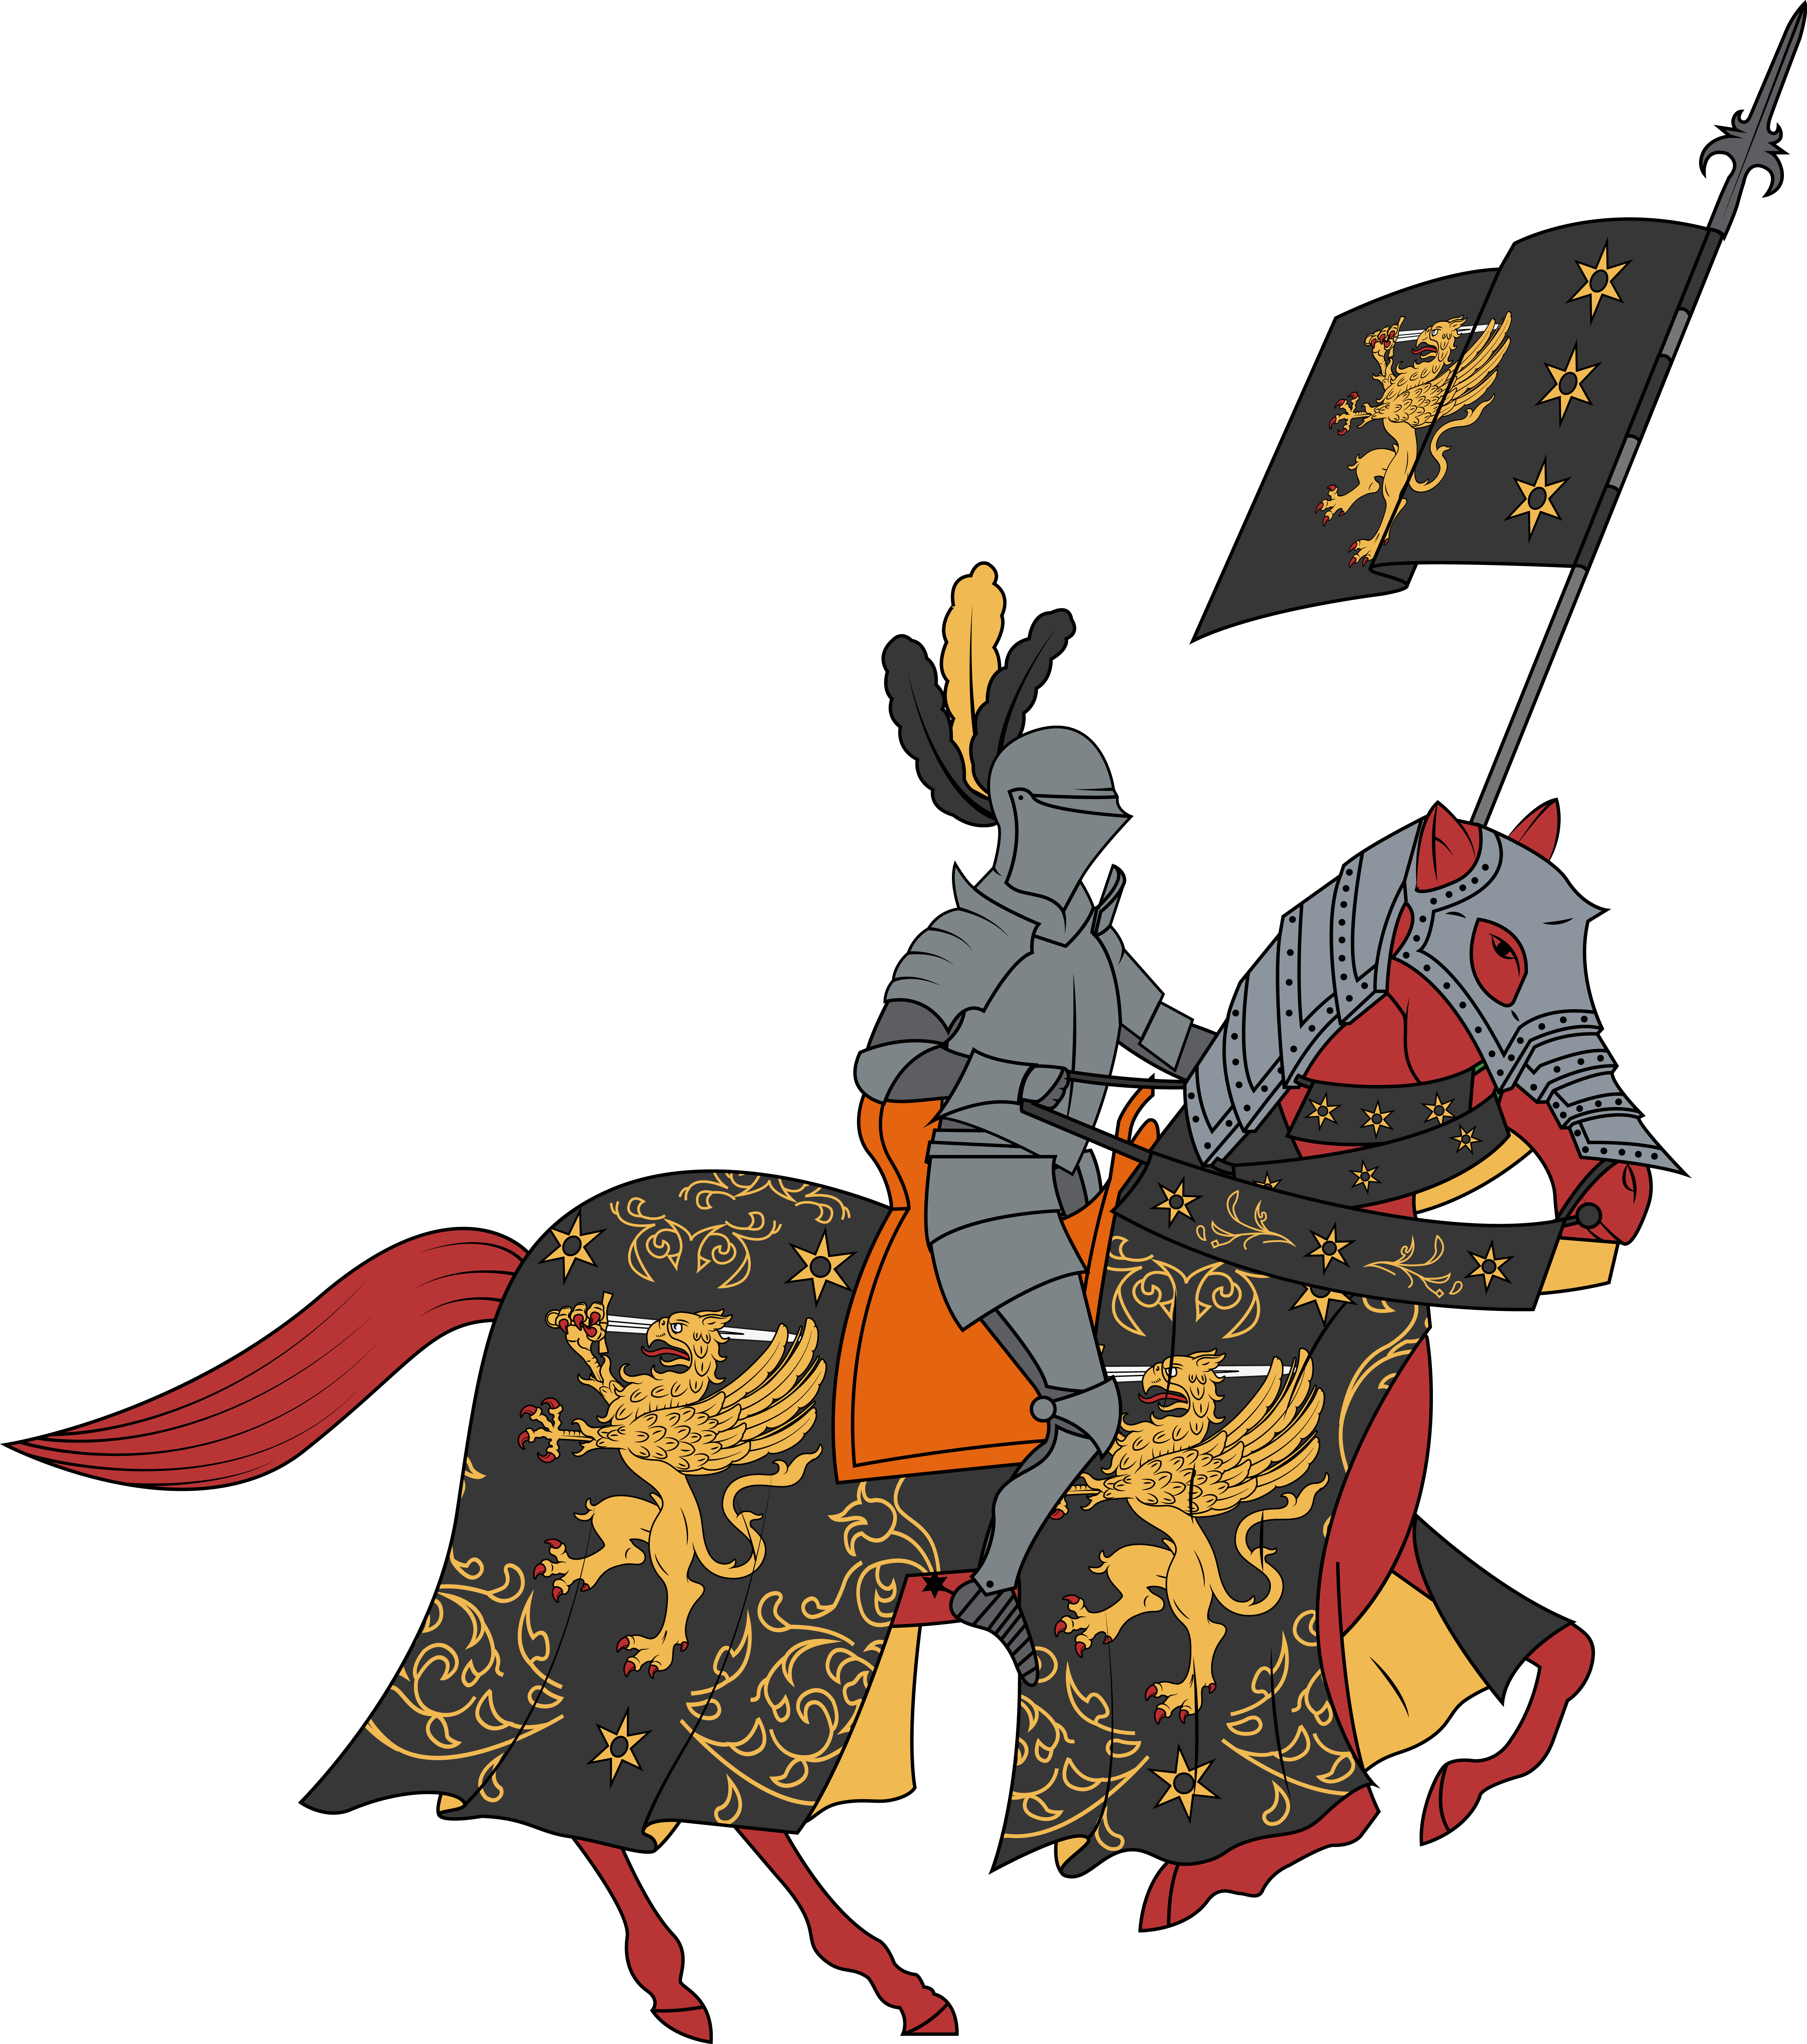 Ocpersonal Arms In Renaissance-era Knight Armour - Illustration (5632x6372)